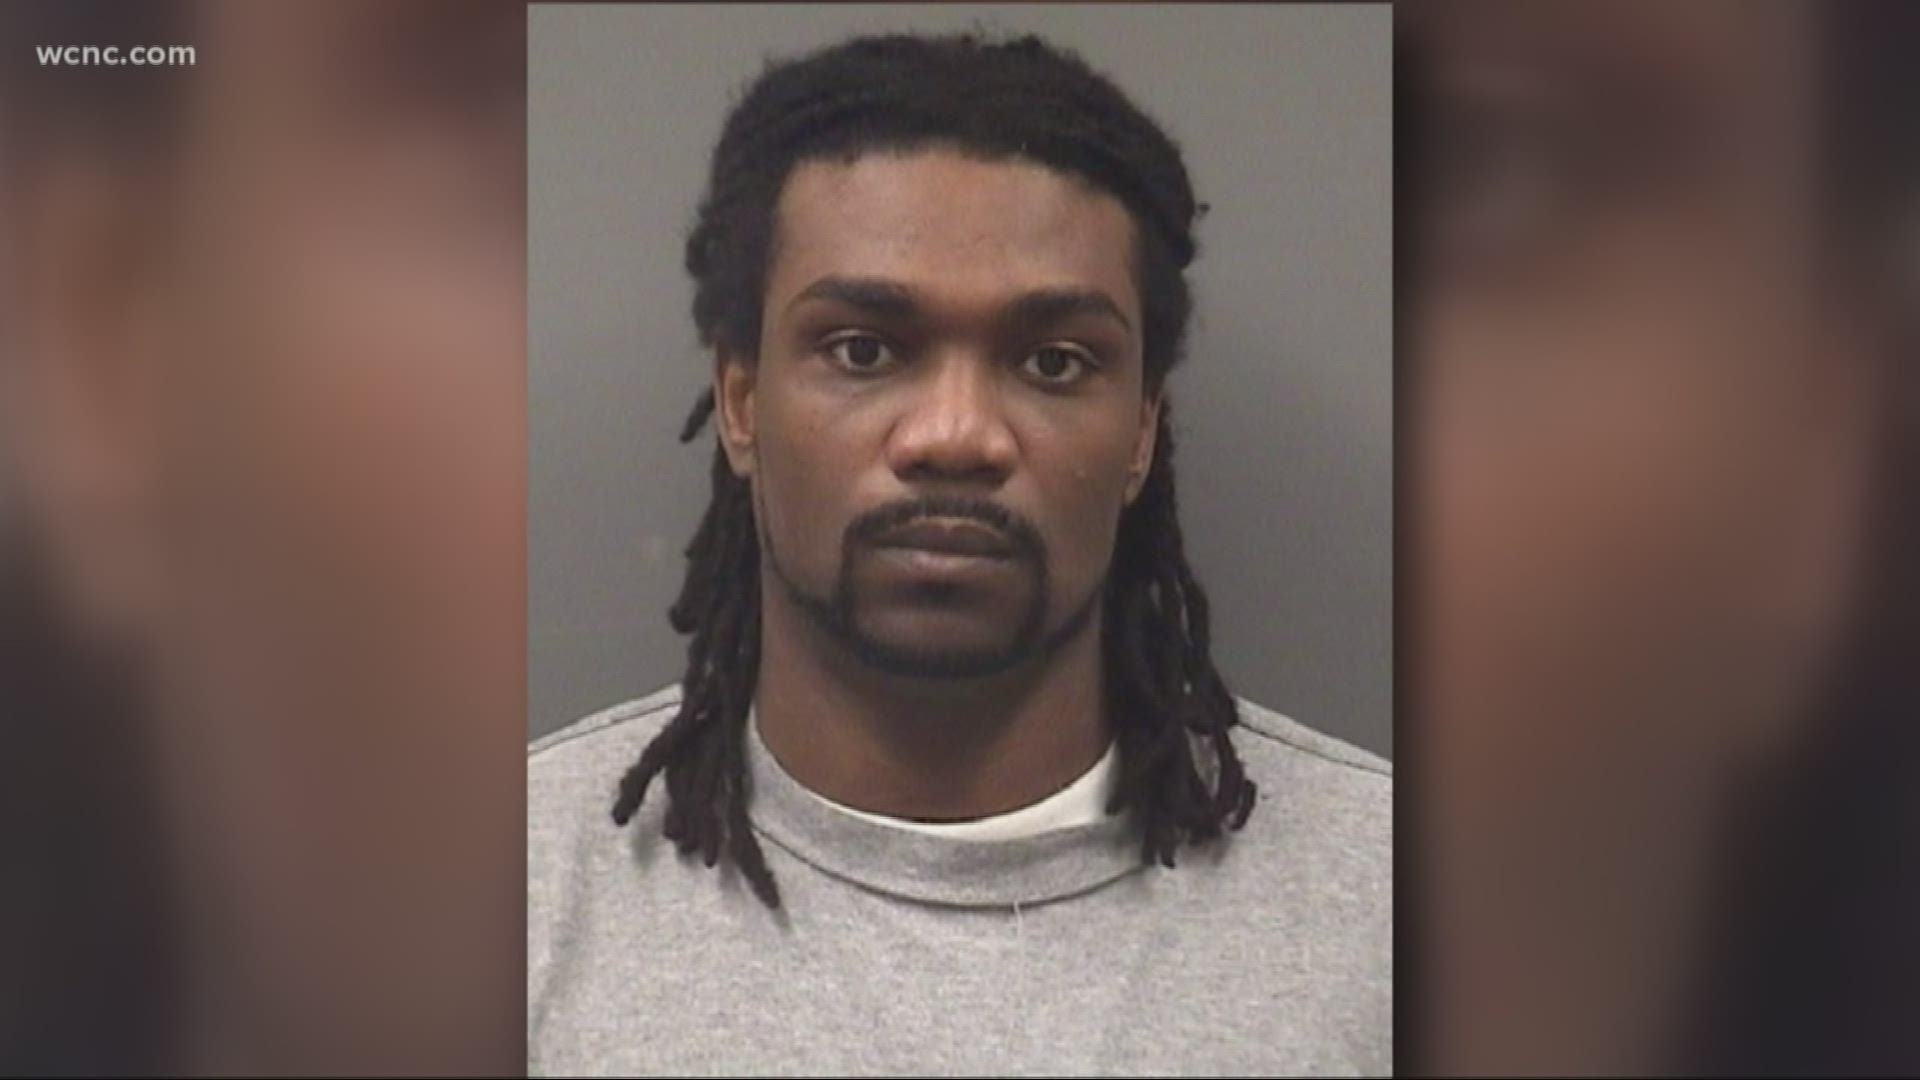 The man pictured, 35-year-old Robin Worth Jr., was found with a gunshot wound early Saturday morning in Rowan County. A suspect has not been arrested at this time.